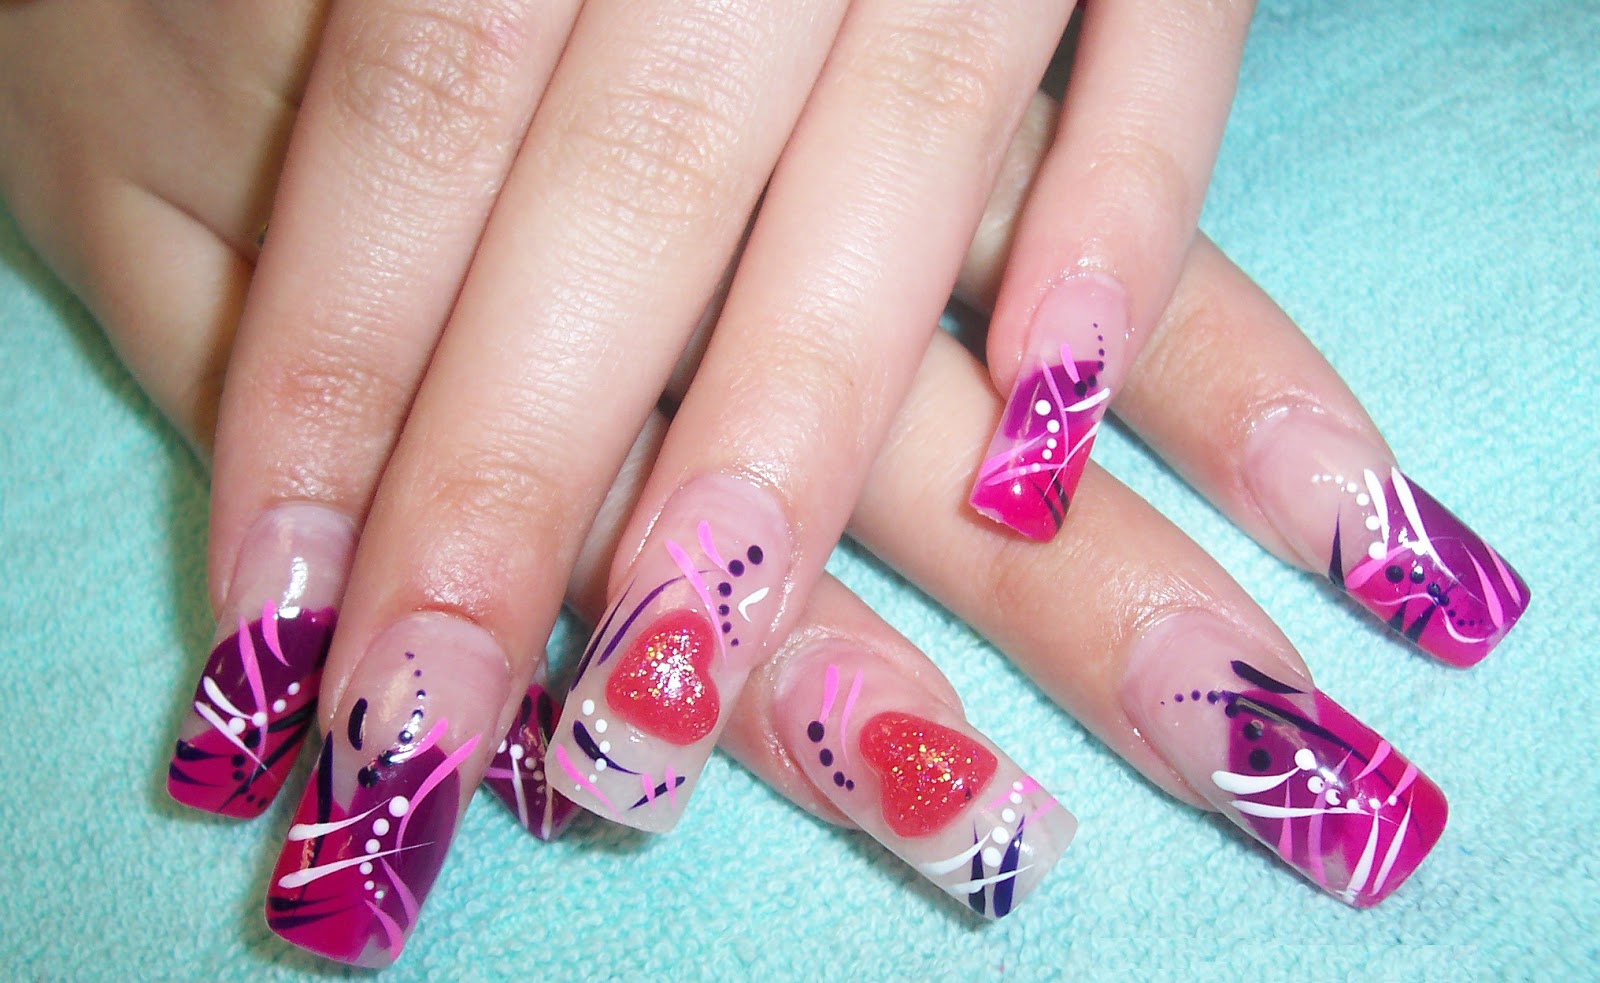 7. Adorable Valentine's Day Nail Designs to Try - wide 8